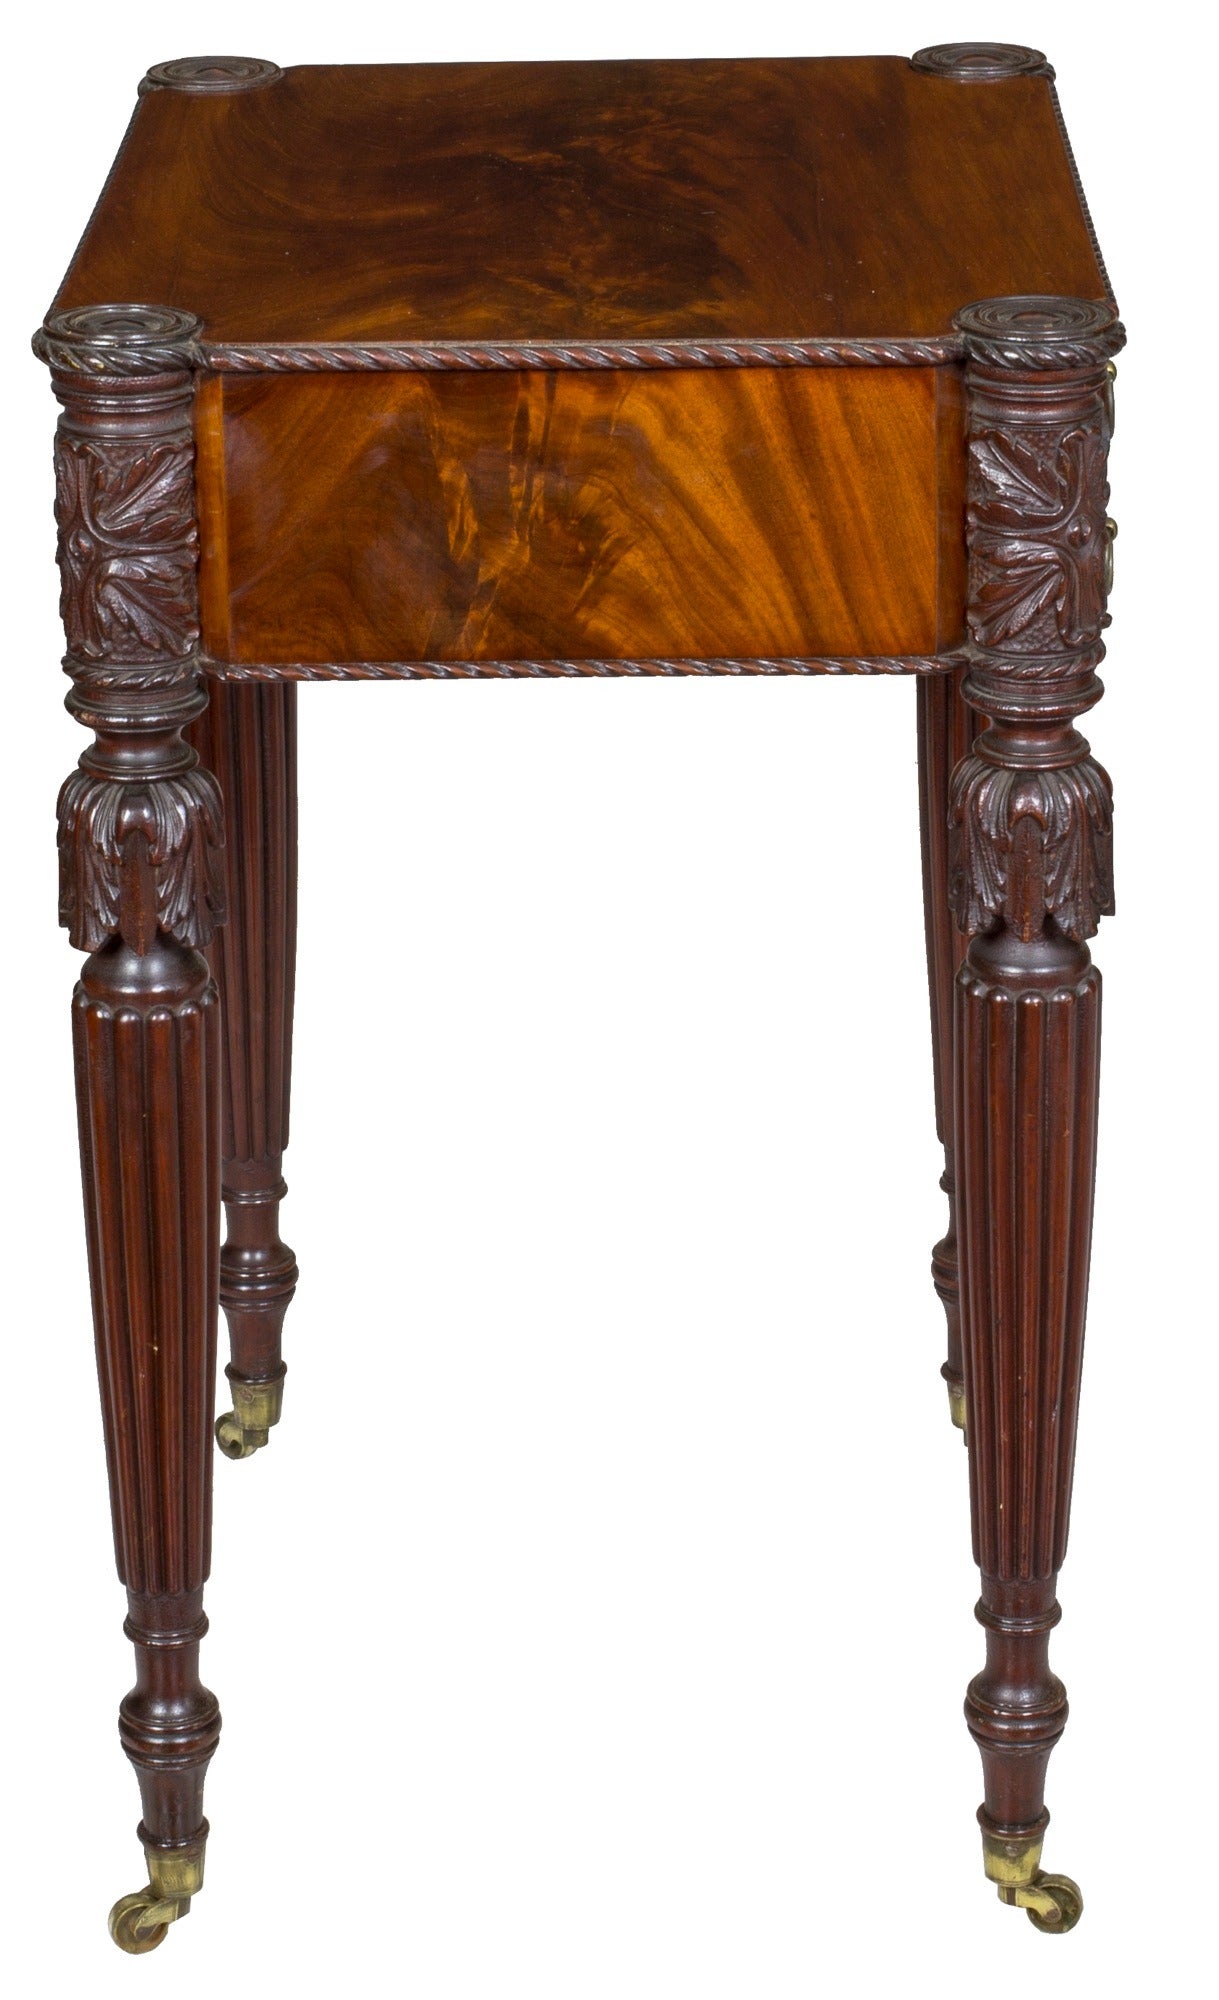 Early 19th Century Carved Mahogany Work Table, McIntyre School Salem, circa 1810-1820 For Sale